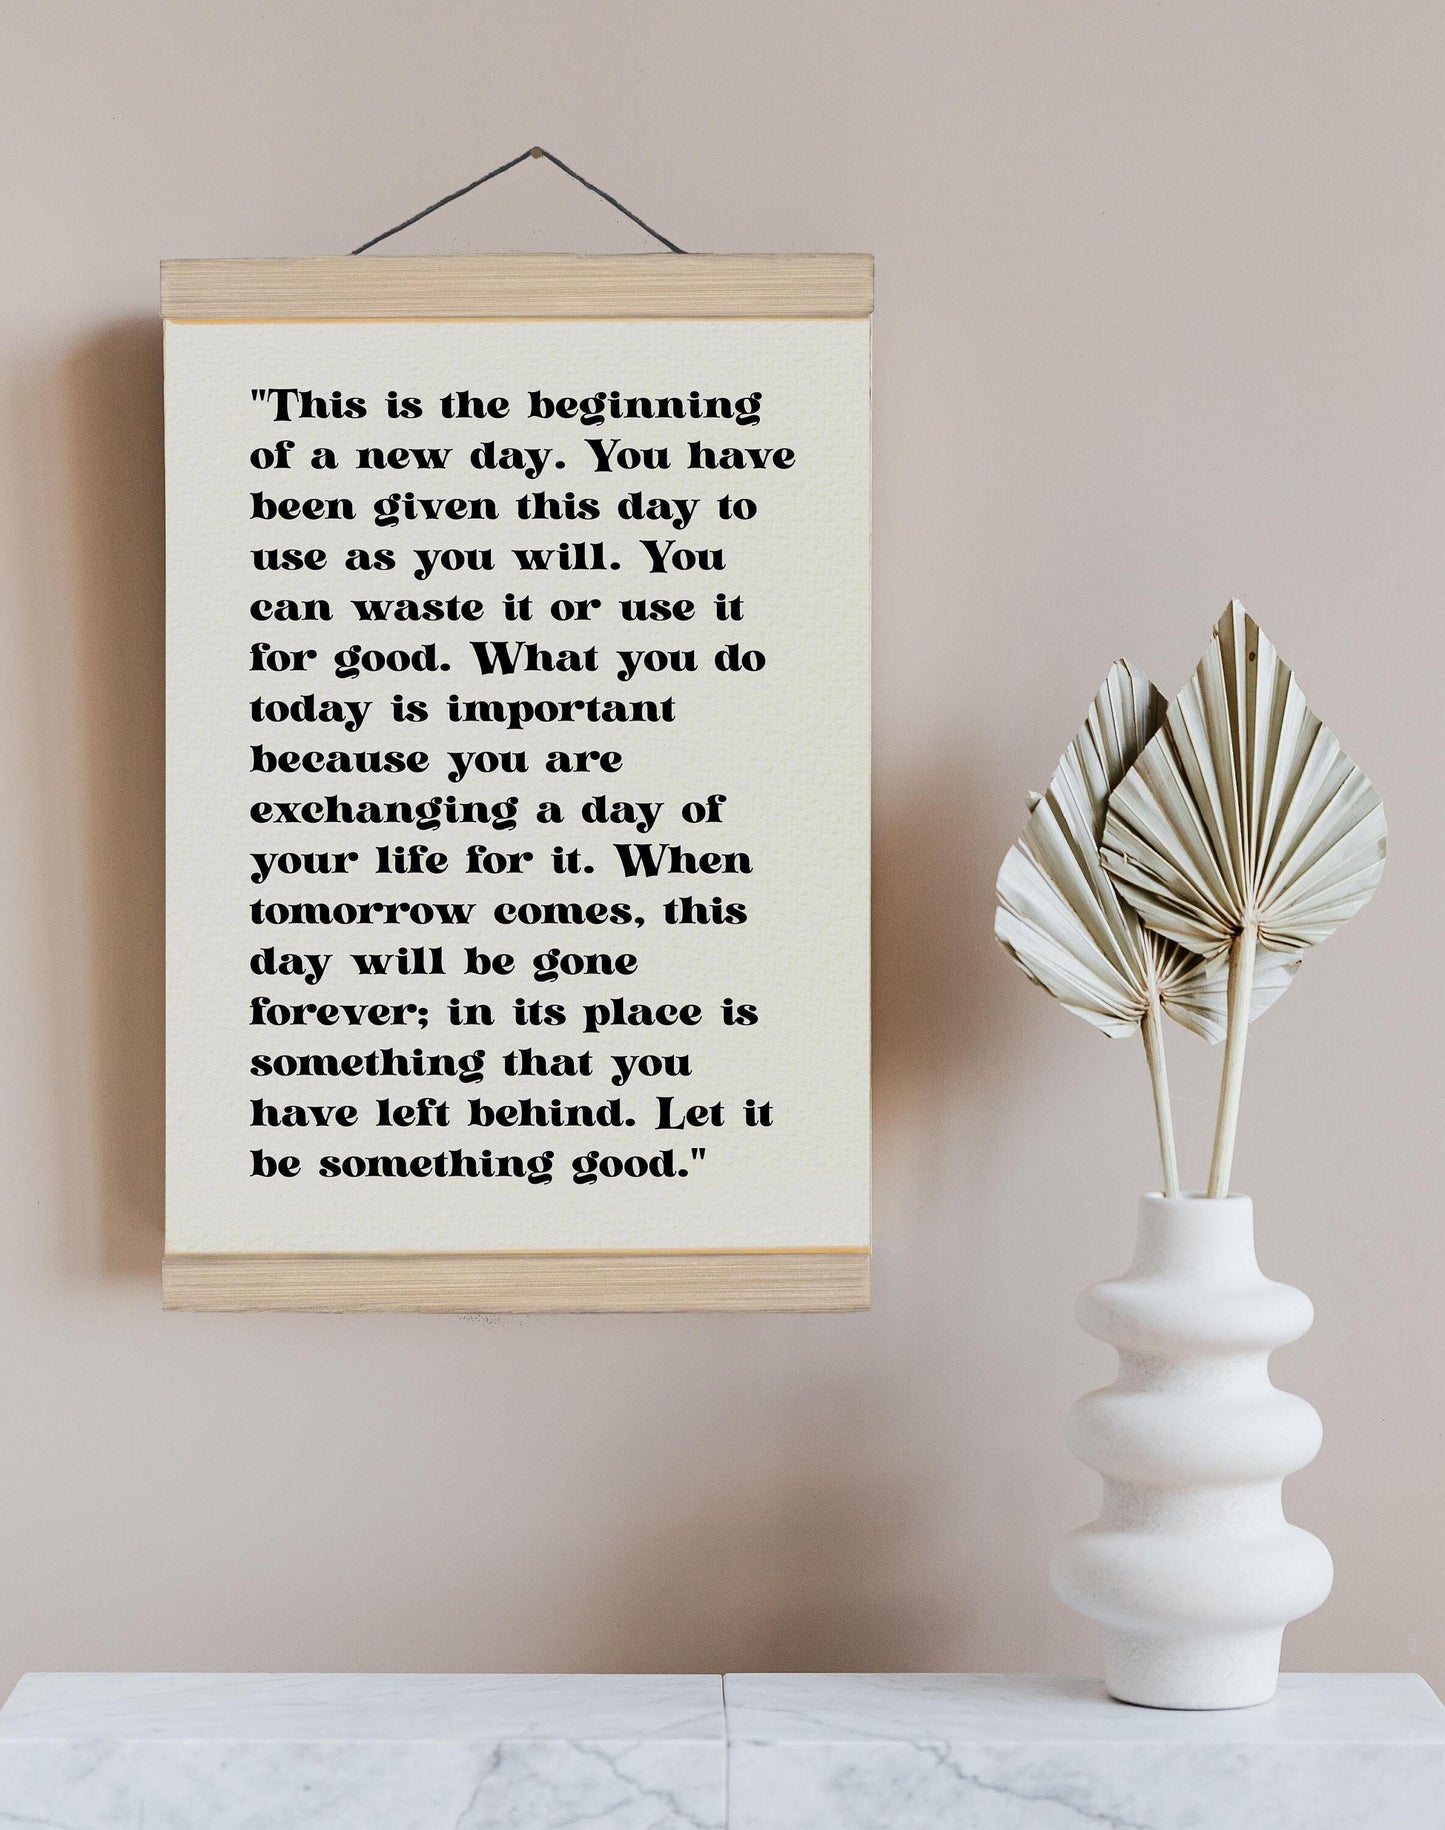 This is the beginning of a new day Book Quote Prints, Framed, Inspirational Wall Decor, quote wall art